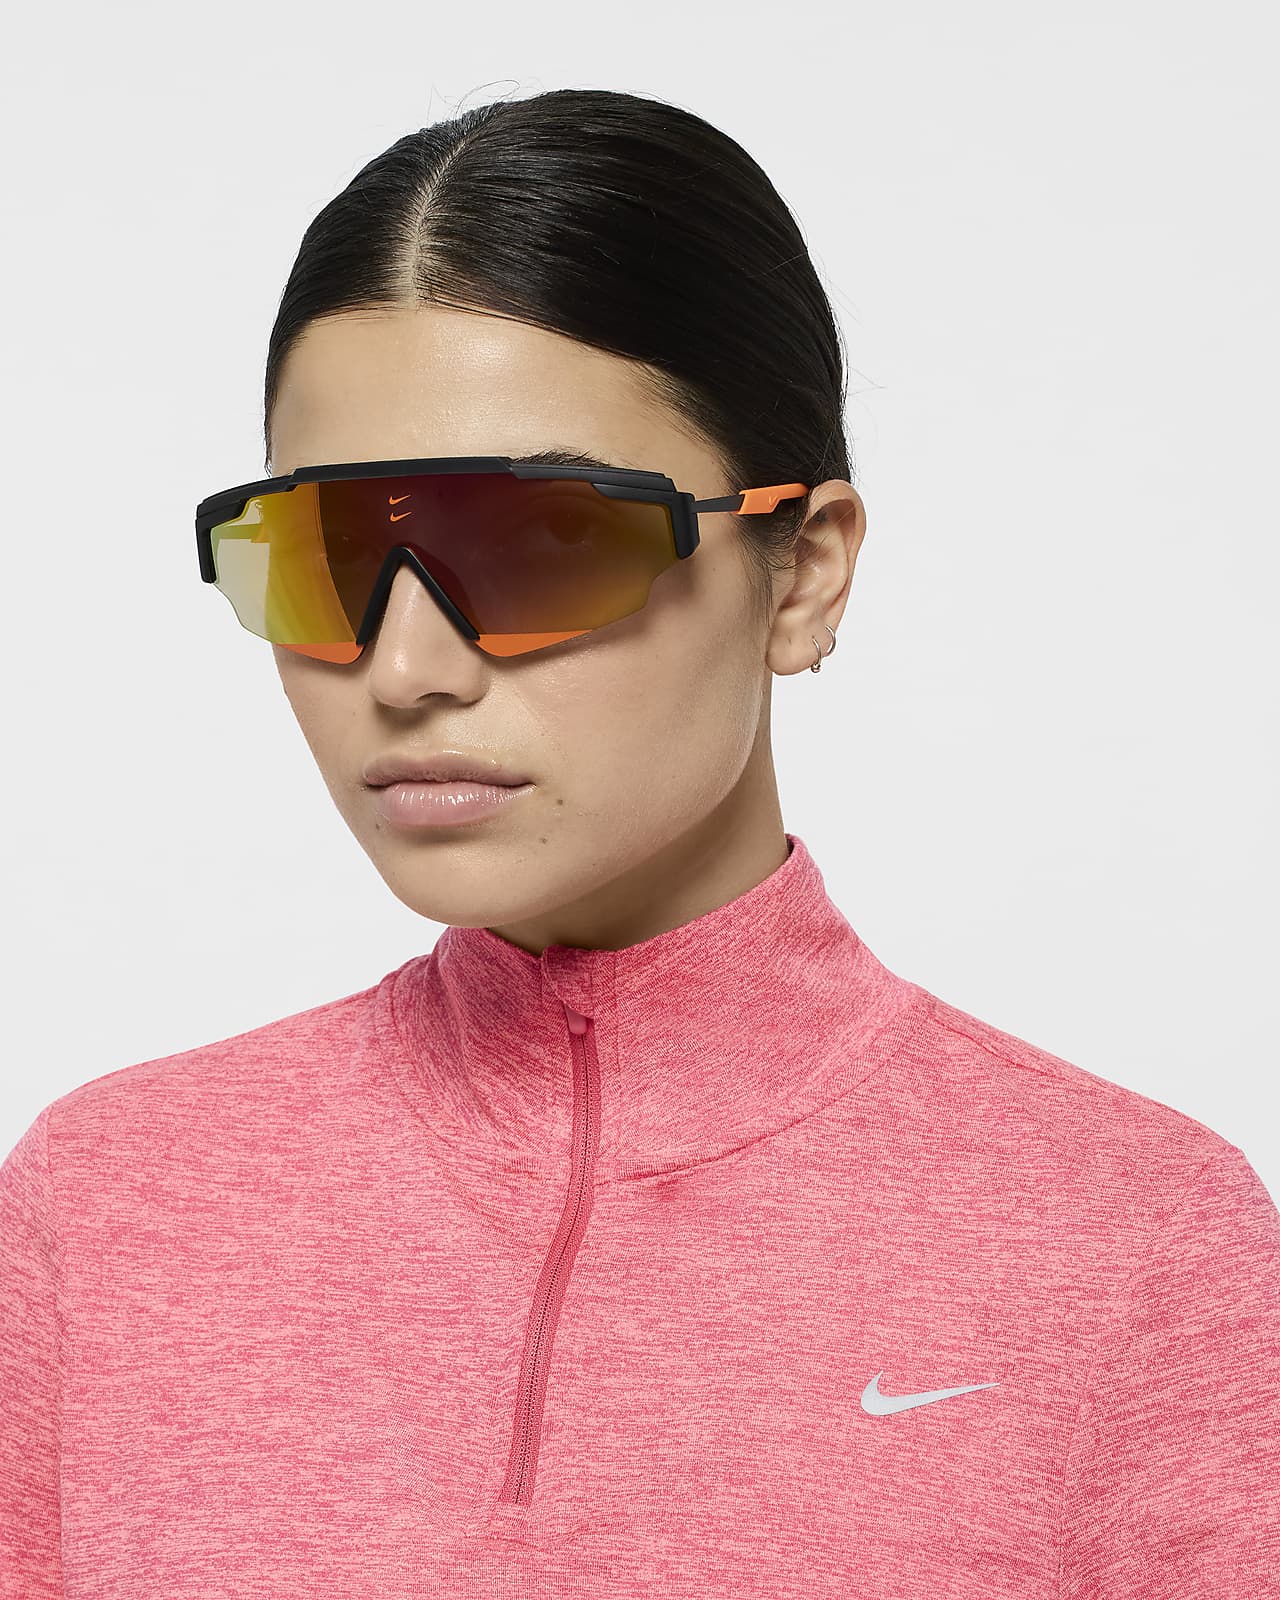 Nike Marquee Edge Sonnenbrille mit Road Tint